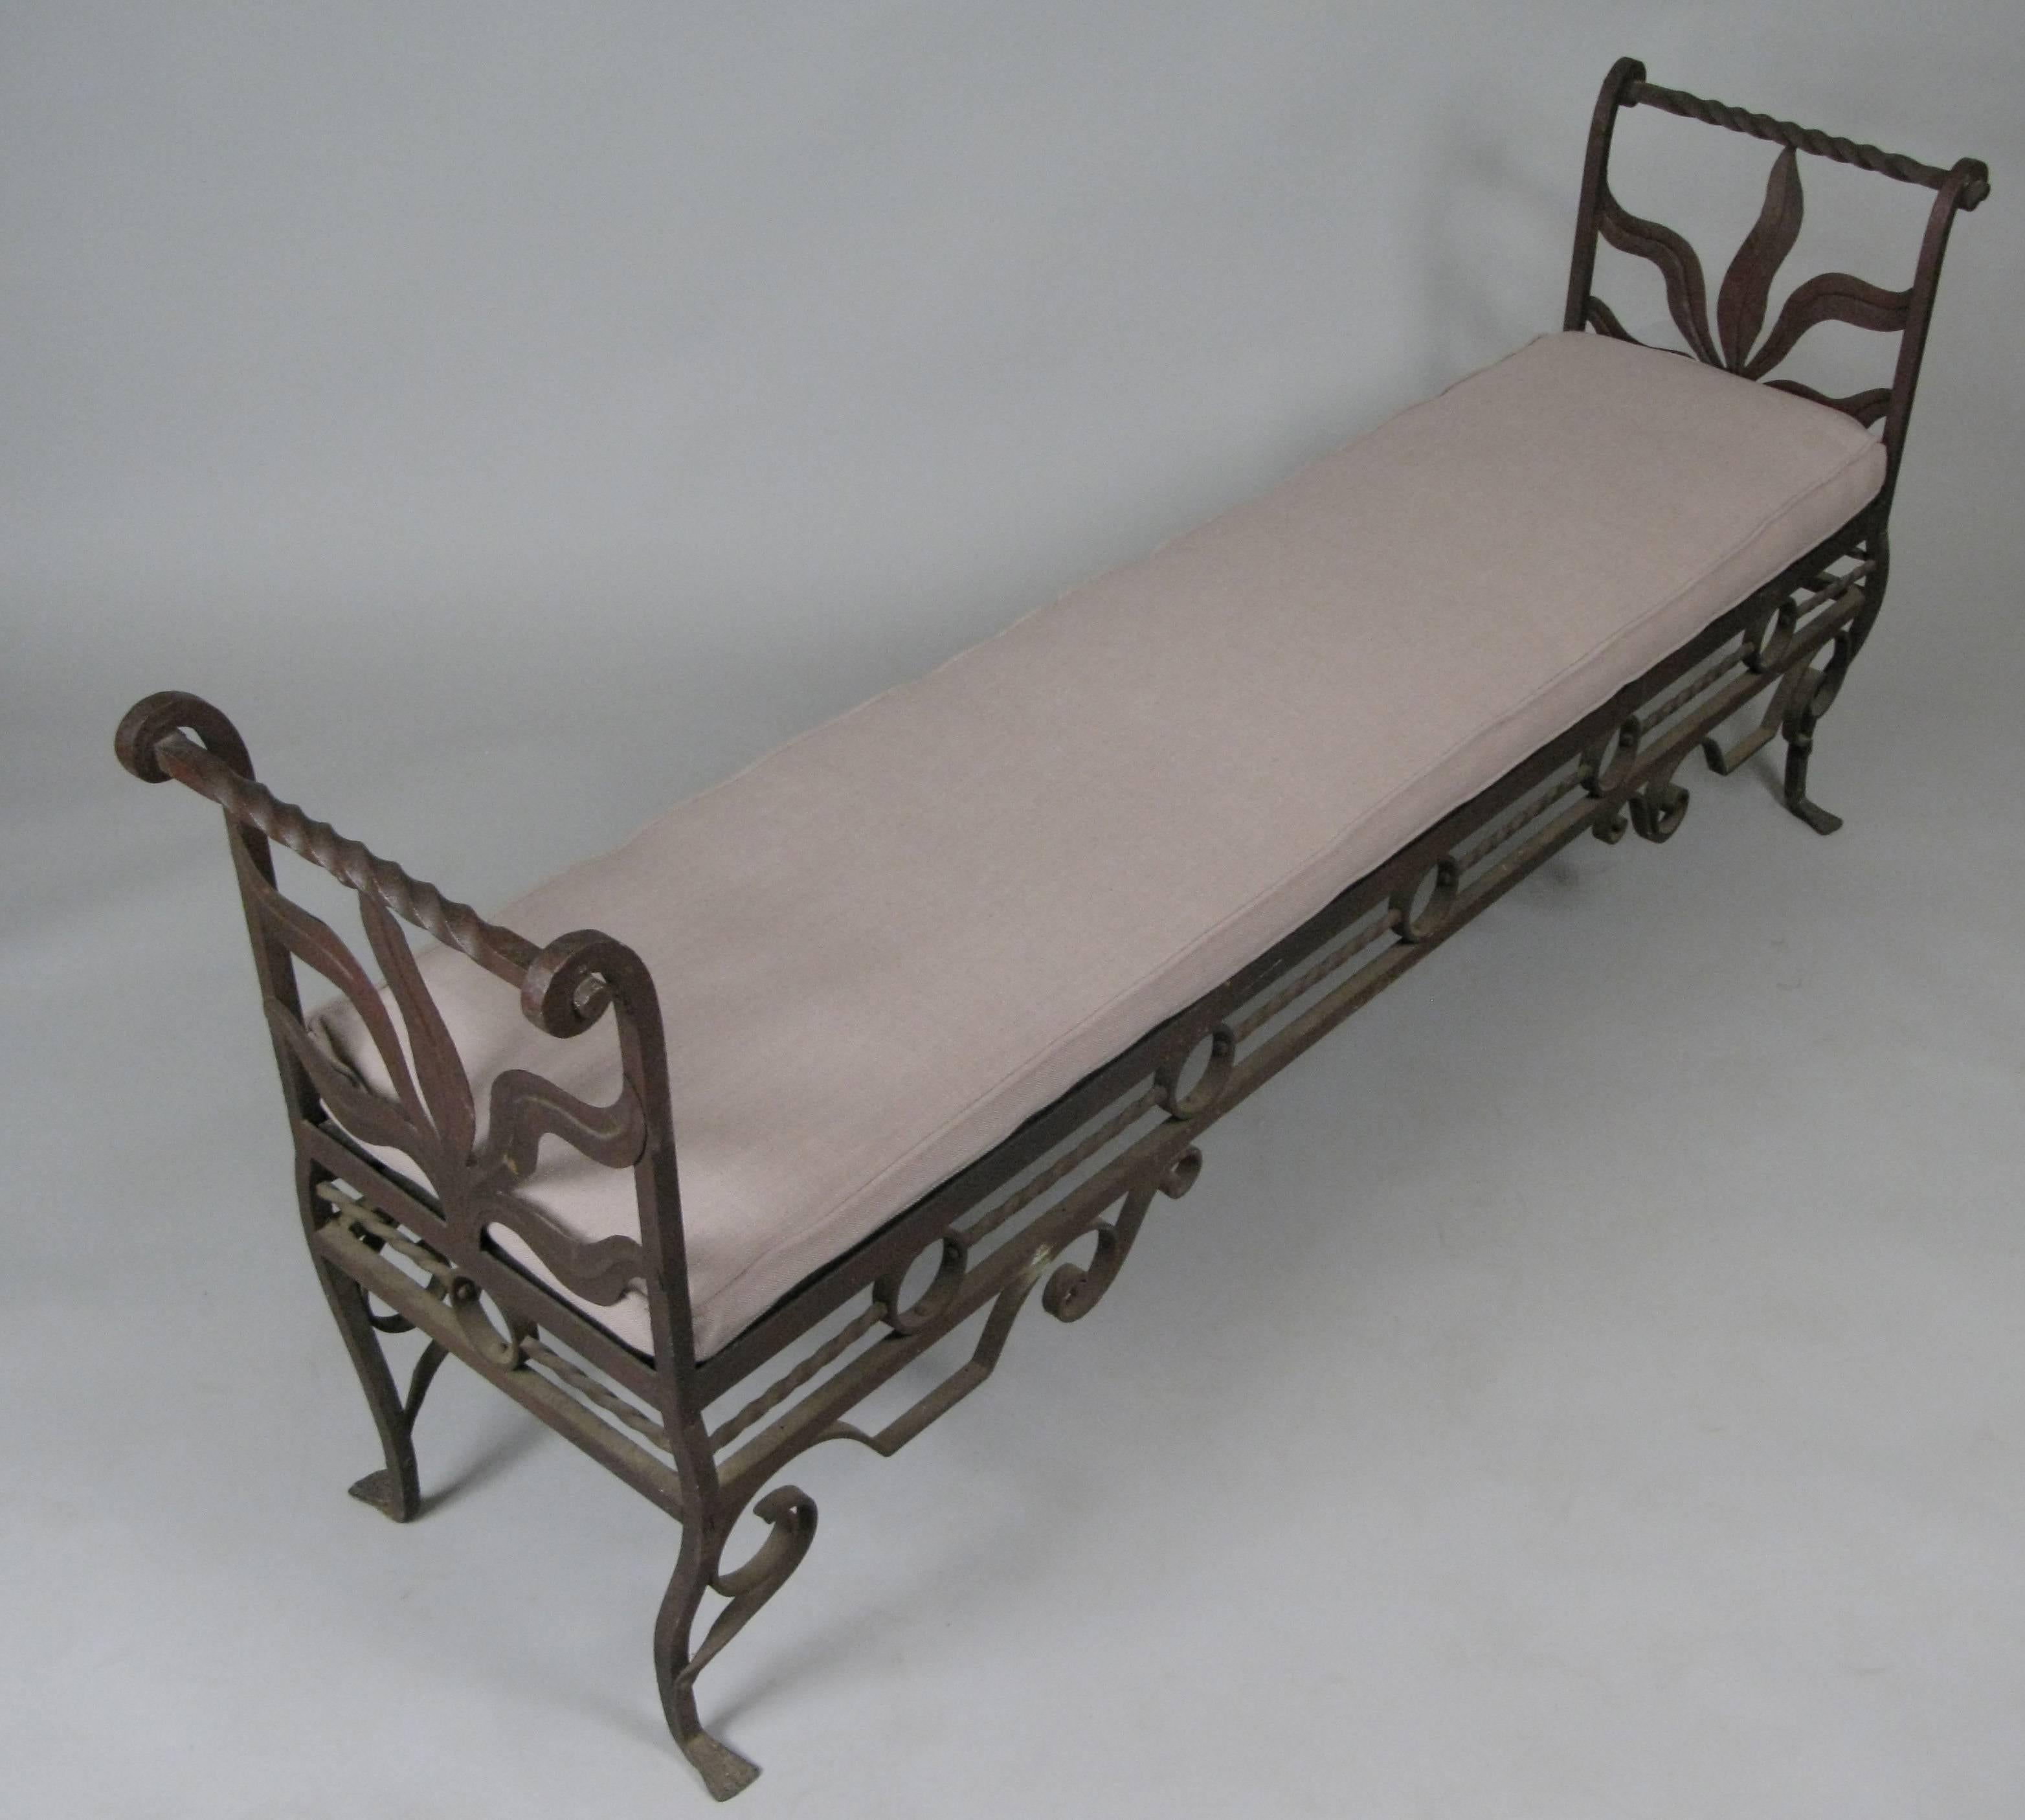 American Antique 1920s Wrought Iron Bench